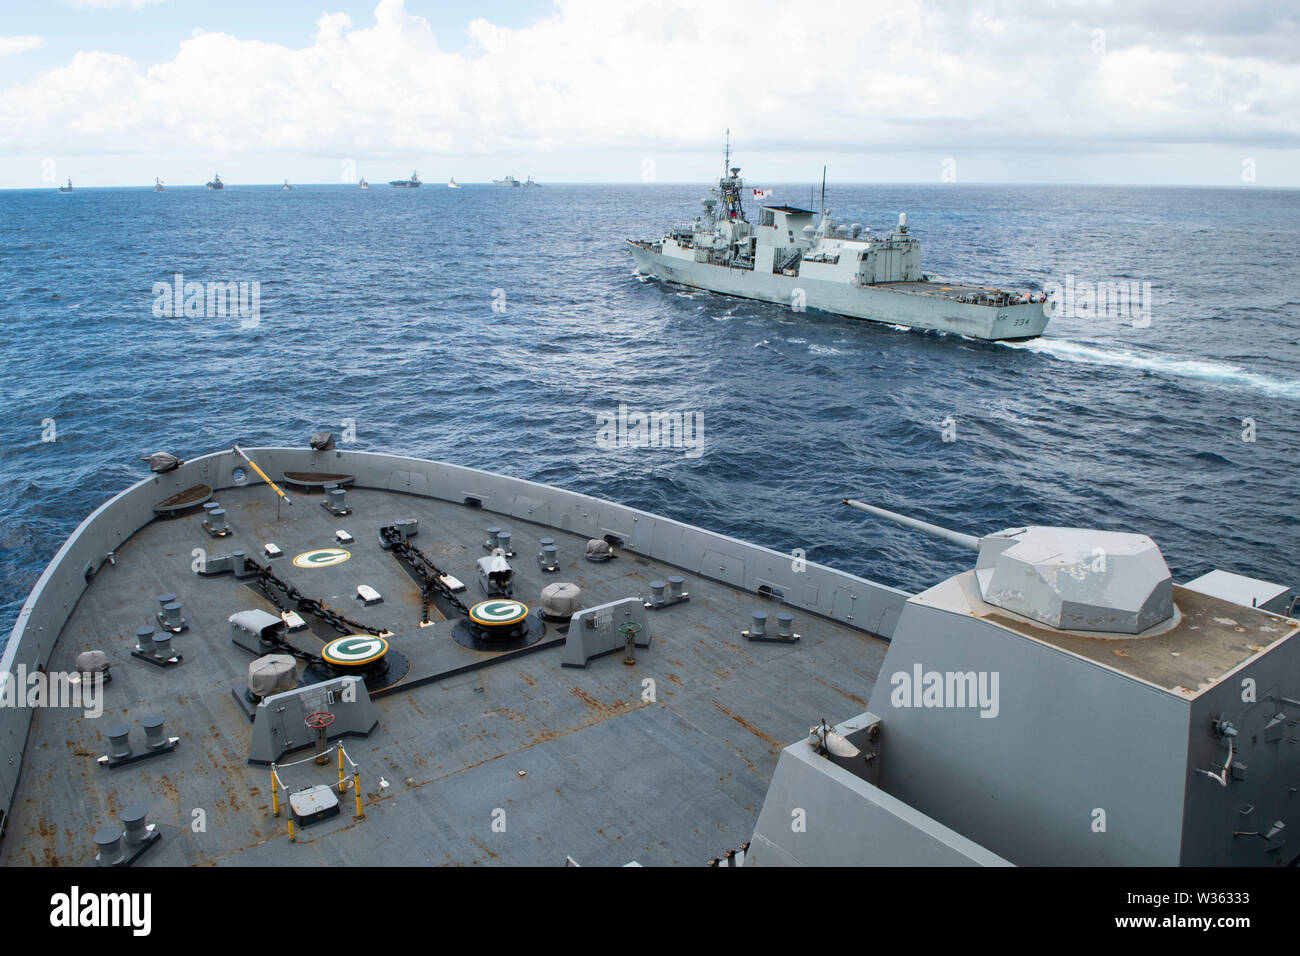 190711-N-DX072-1034 TASMAN SEA (July 11, 2019) The U.S. Navy San Antonio-class amphibious transport dock ship USS Green Bay (LPD 20) and the Royal Canadian Navy Halifax-class frigate HMCS Regina (FFH 334) transit in a photo exercise (PHOTOEX) during Talisman Sabre 2019. Green Bay, part of the Wasp Expeditionary Strike Group, with embarked 31st Marine Expeditionary Unit, is currently participating in Talisman Sabre 2019 off the coast of Northern Australia. A bilateral, biennial event, Talisman Sabre is designed to improve U.S. and Australian combat training, readiness and interoperability throu Stock Photo